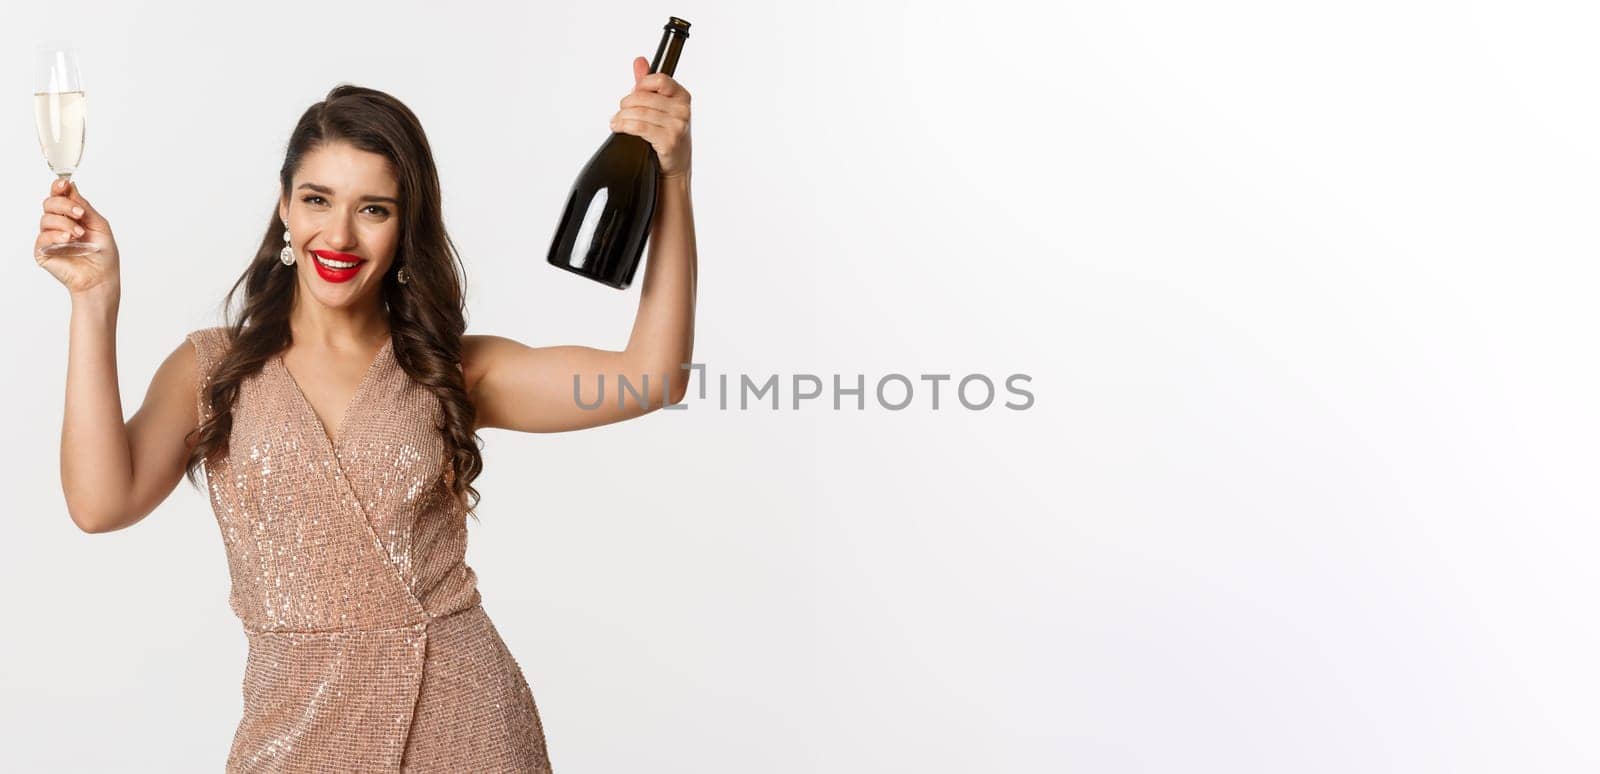 Winter holidays celebration concept. Excited beautiful woman in dress raising glass of champagne for toast, enjoying Christmas party, standig over white background.